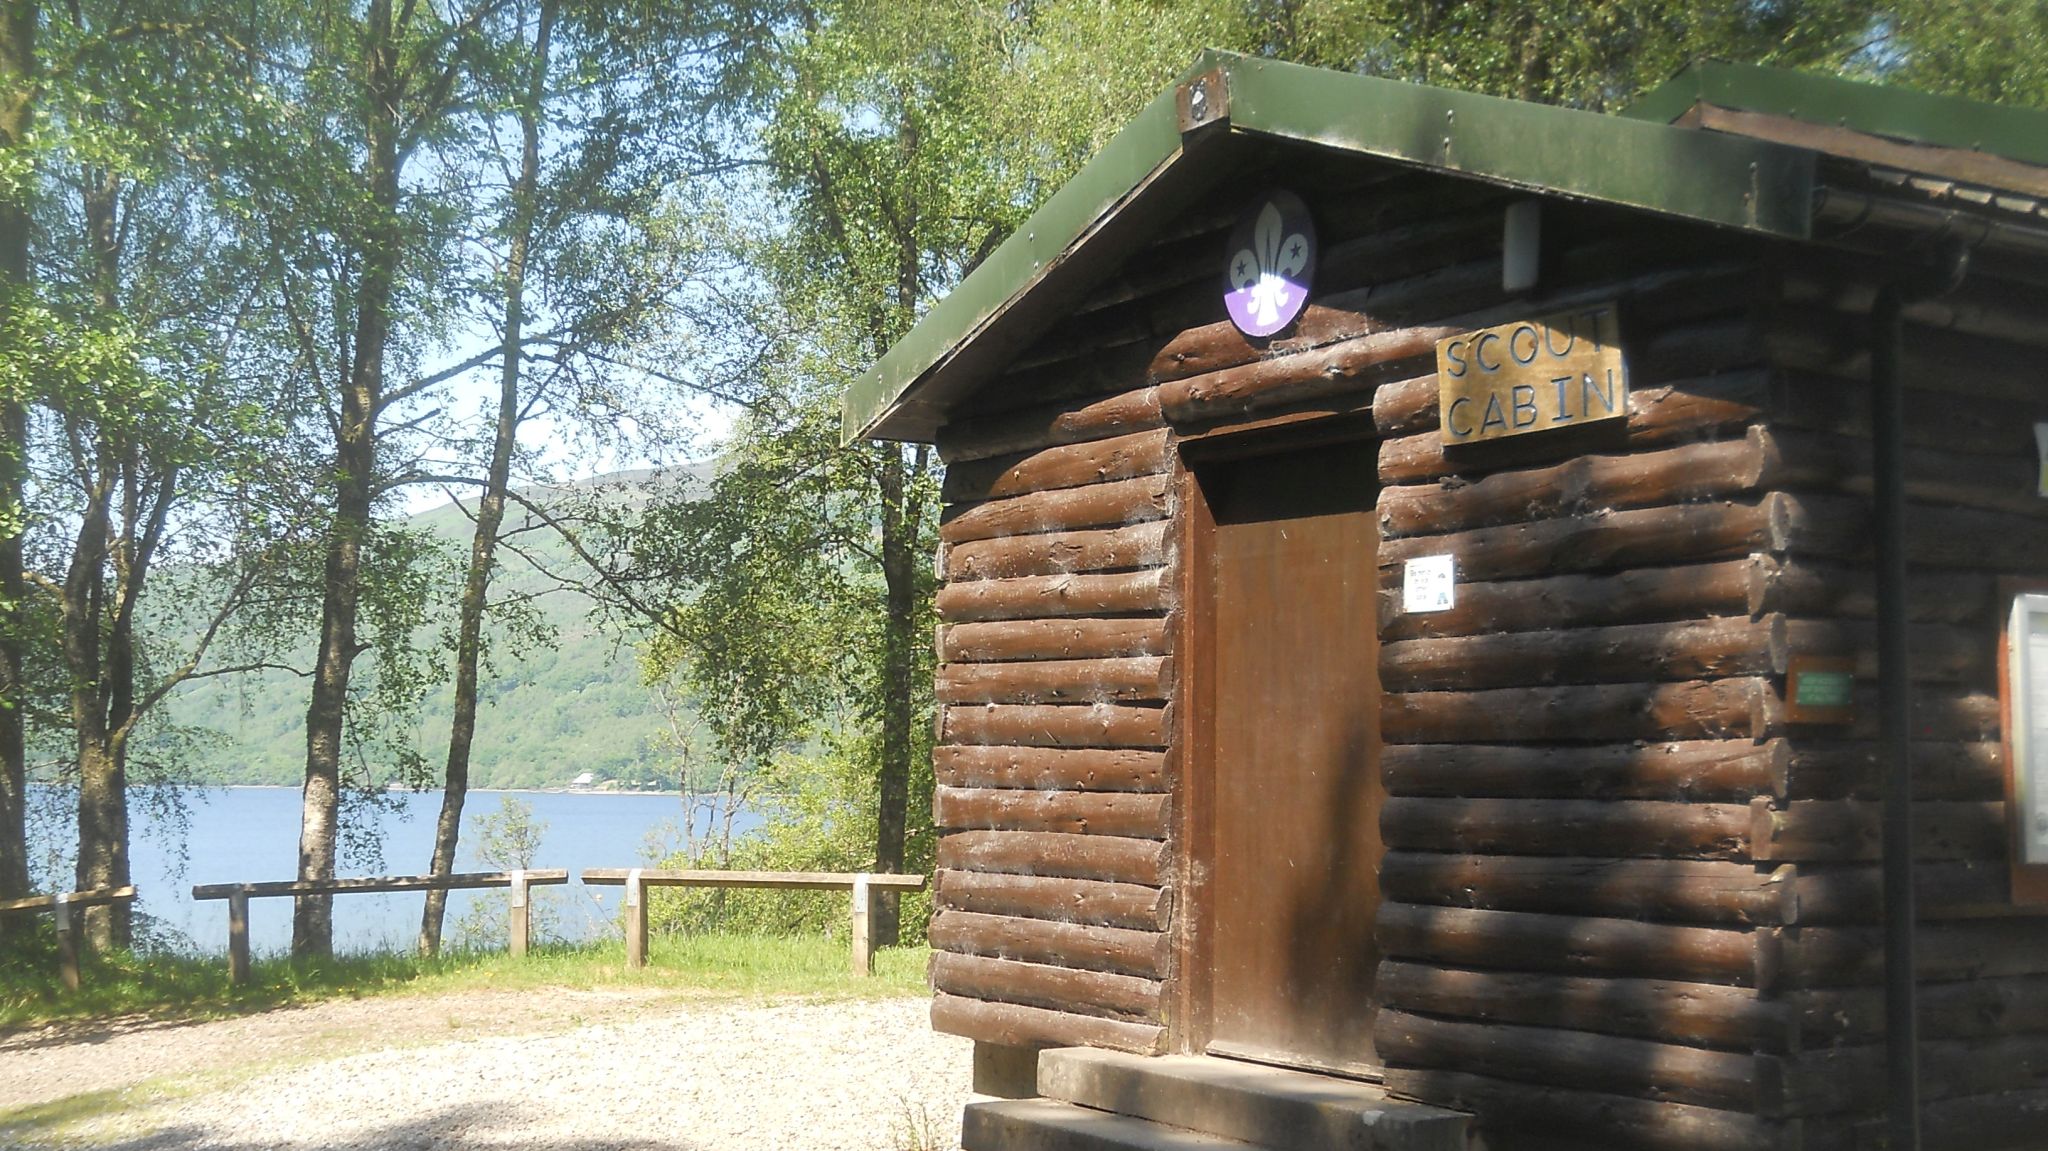 Scouts Activity Centre on the side of Loch Venacher